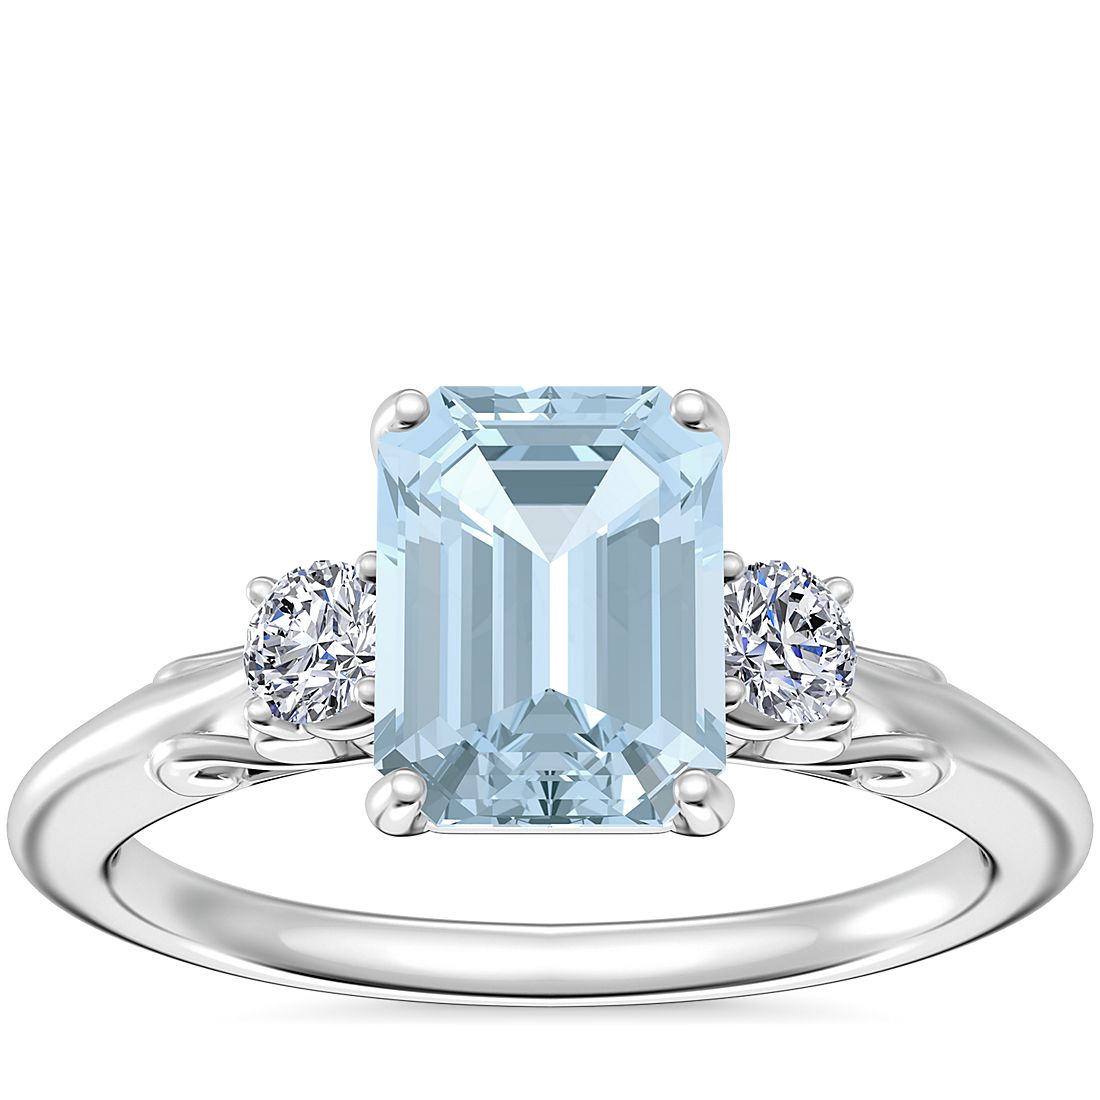 Vintage Three Stone Engagement Ring with Emerald-Cut Aquamarine in 14k White Gold (8x6mm)